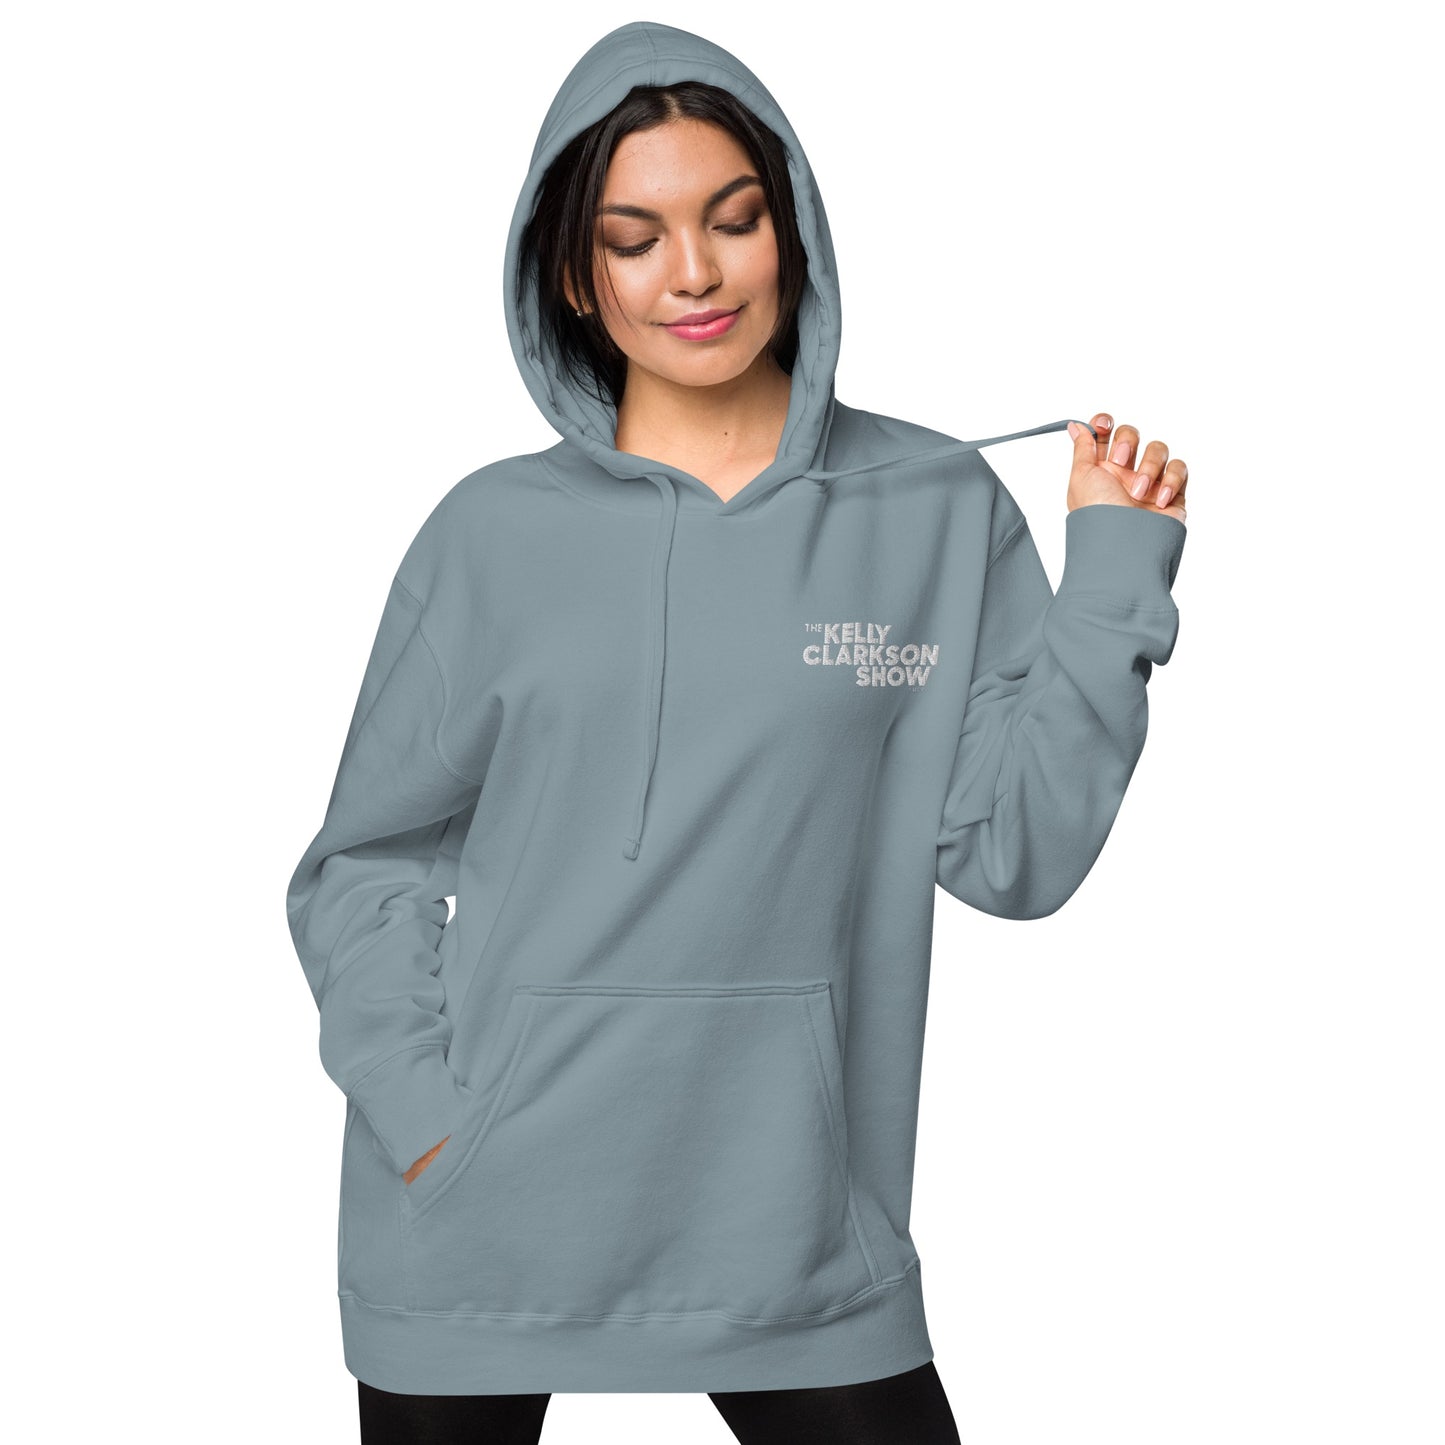 The Kelly Clarkson Embroidered Logo Unisex Hoodie